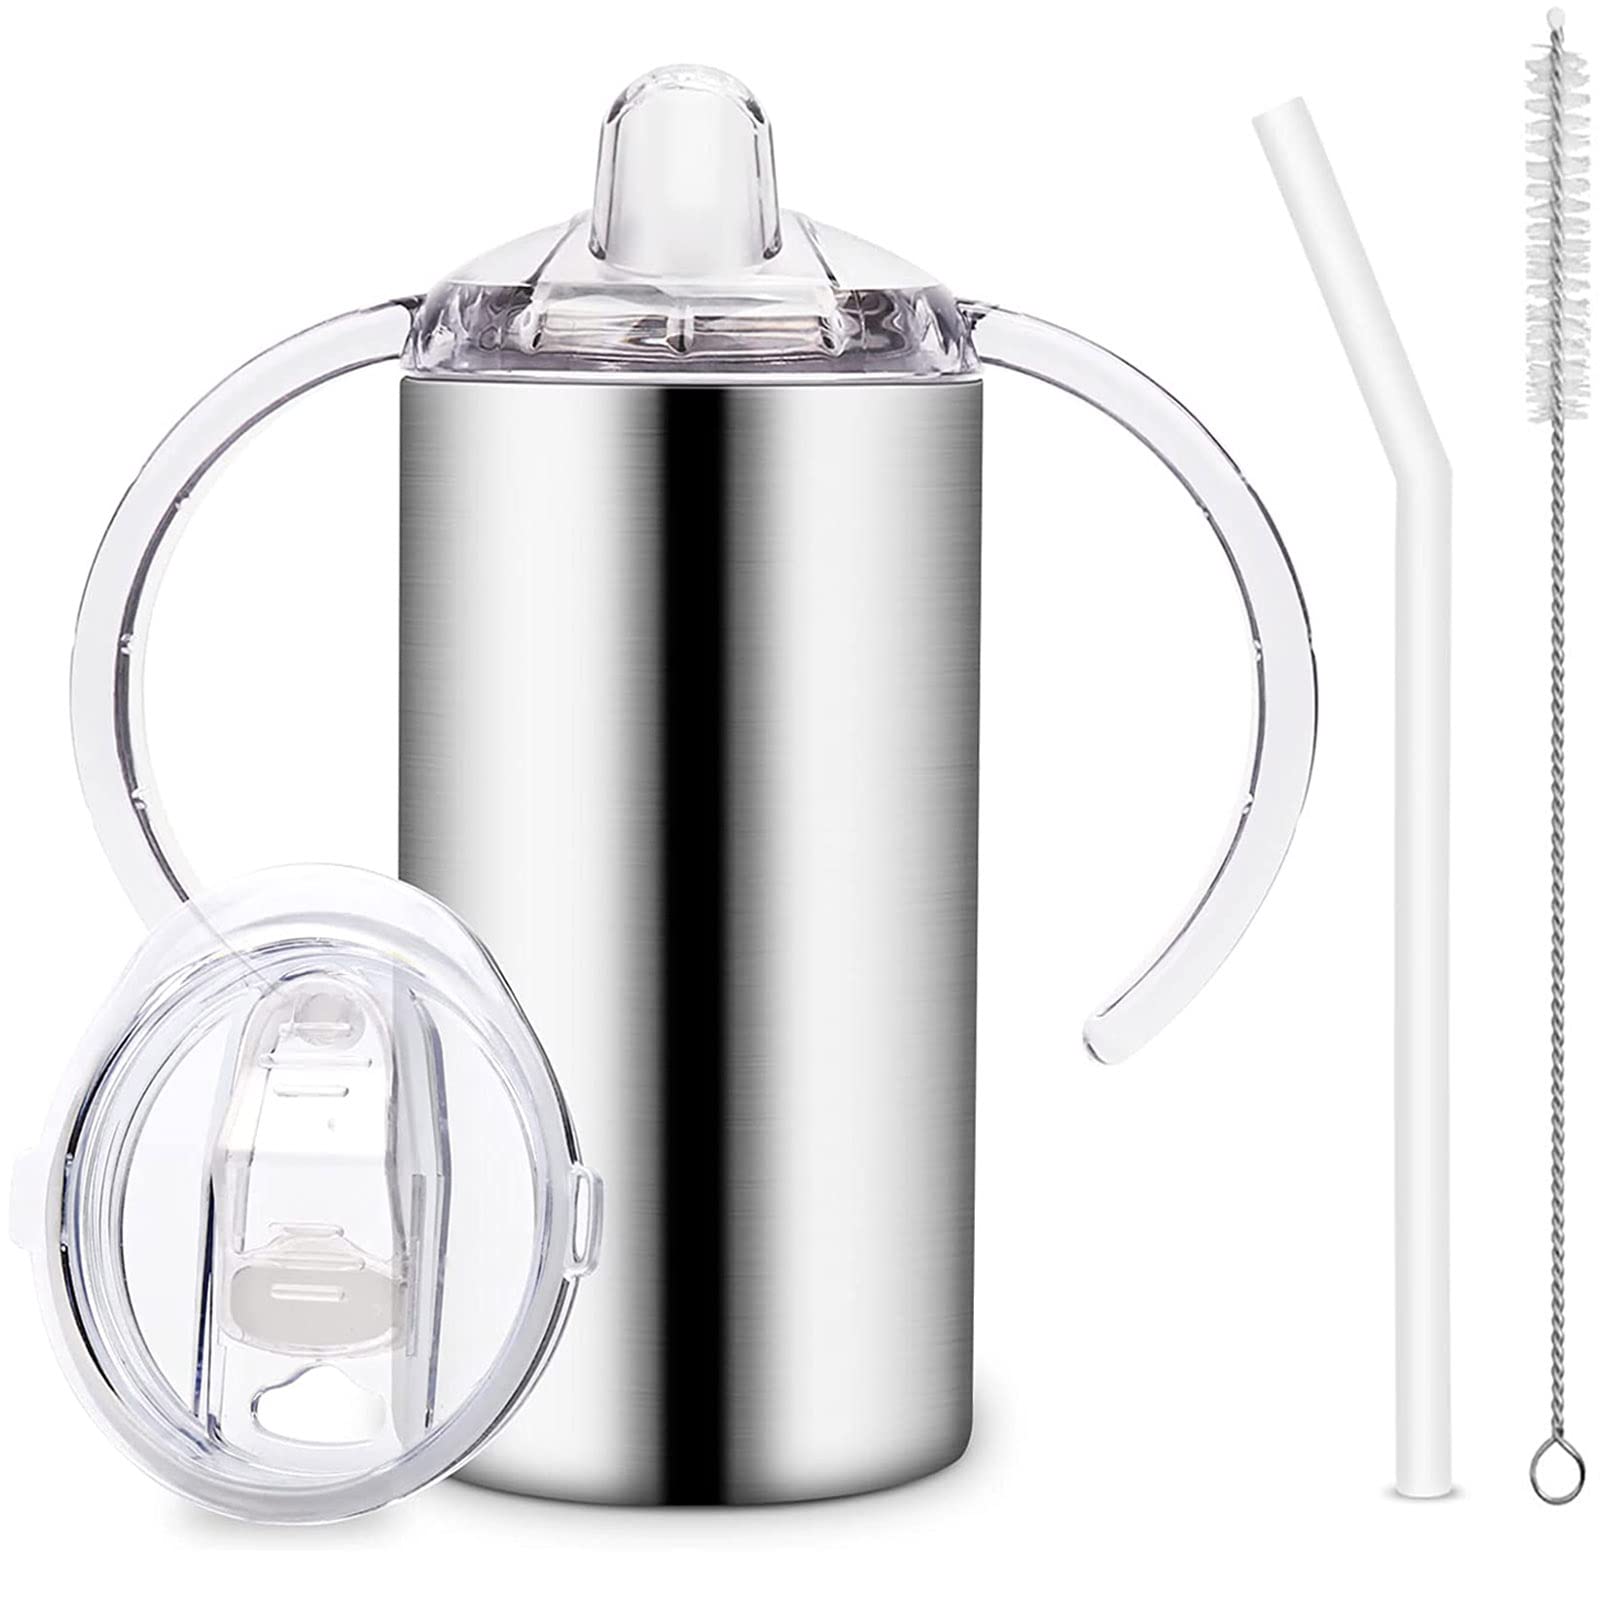 Kid's Cups, Sippy Cups, Steel Cups with Straws